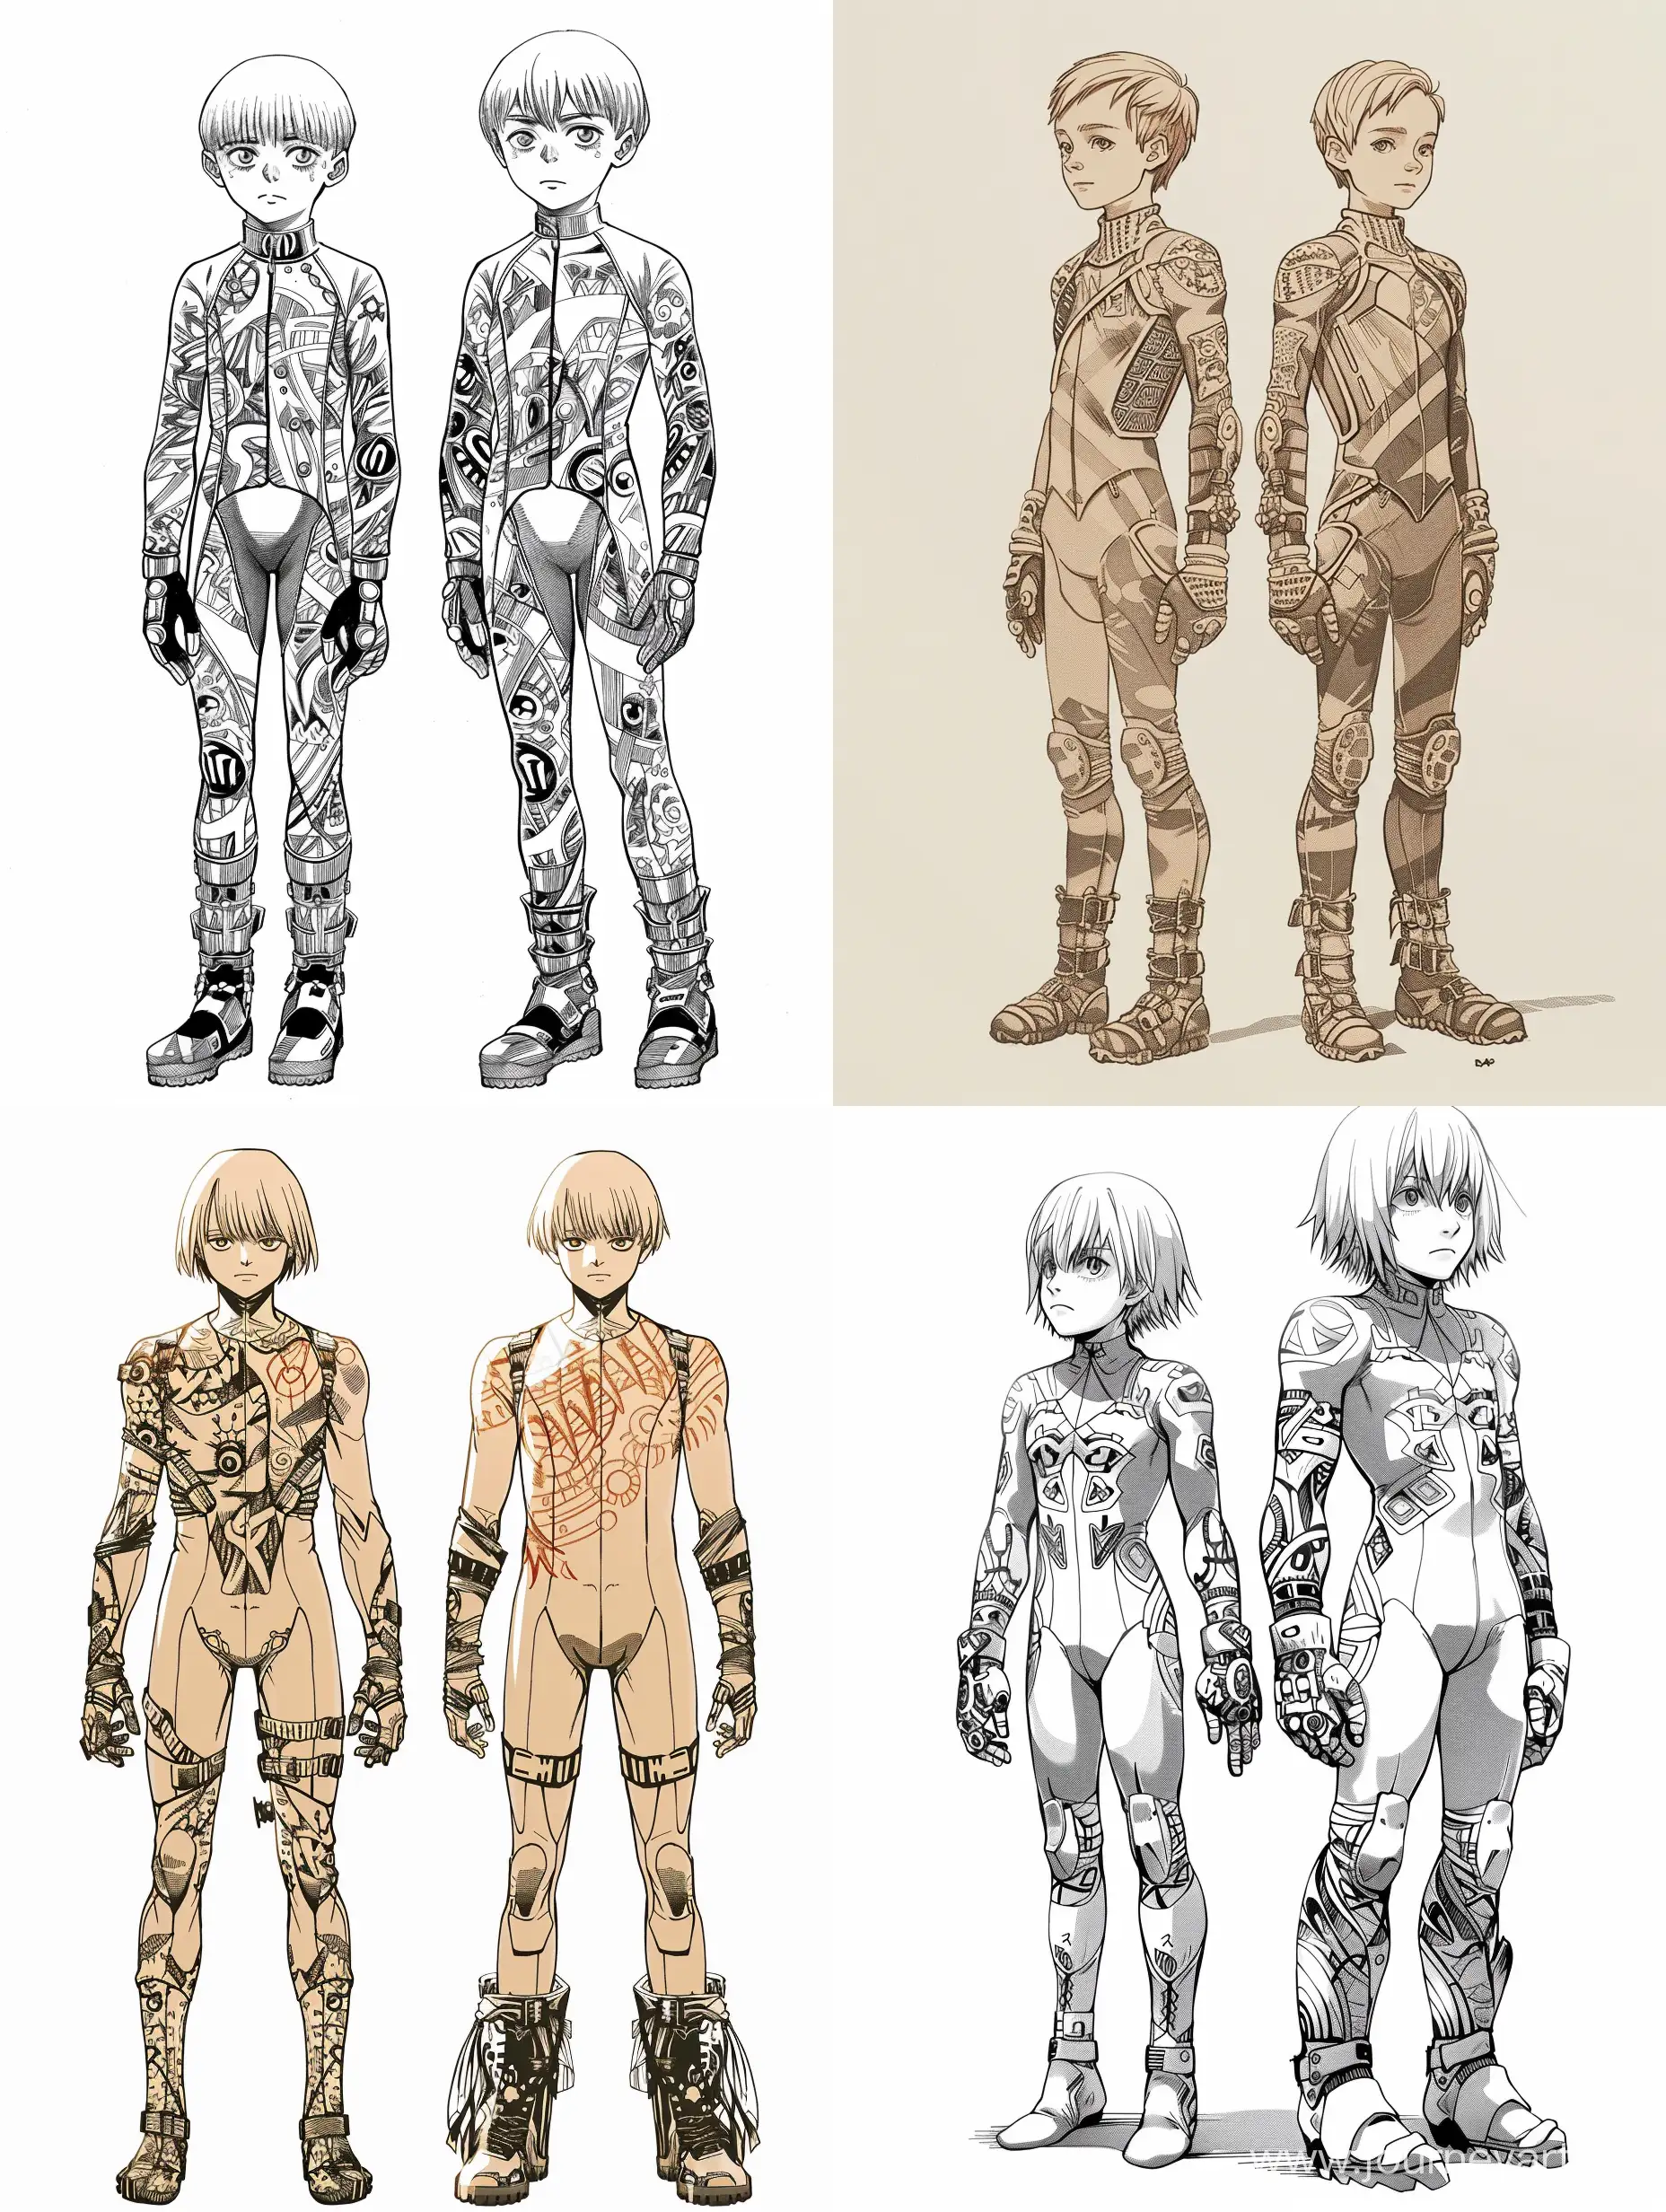 Dynamic-Manga-Twins-Blonde-Brothers-in-Insulated-Gear